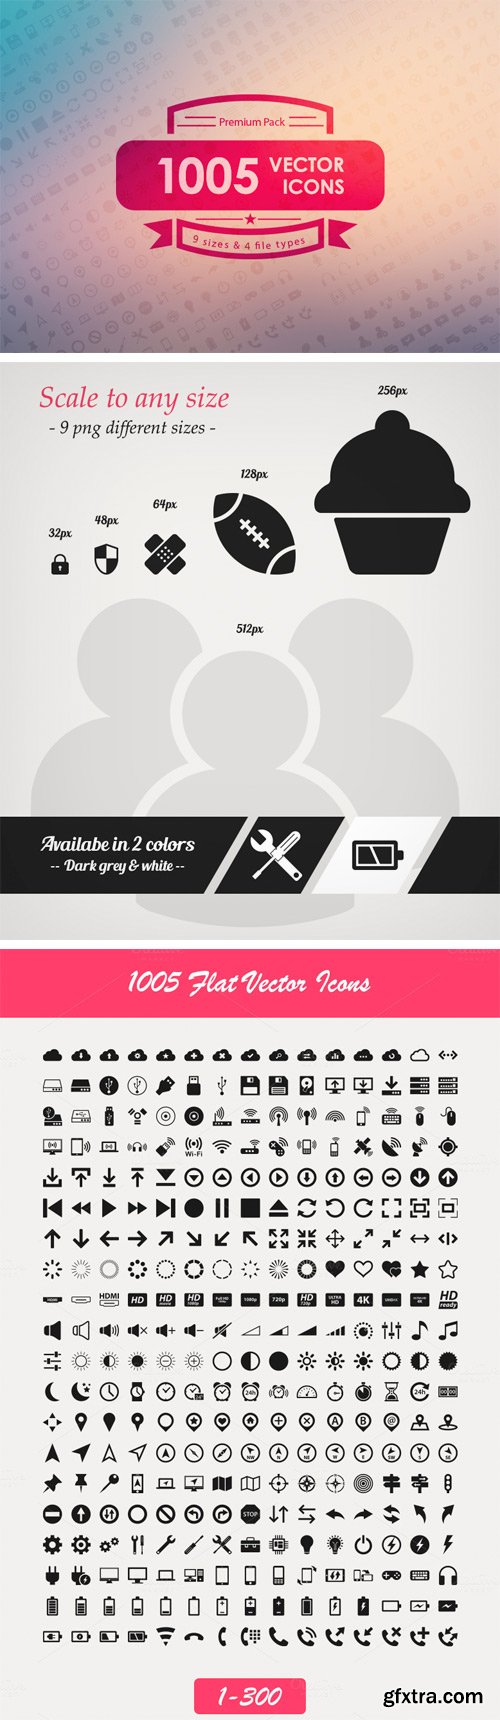 CM 230294 - 1005 Vector Icons Pack